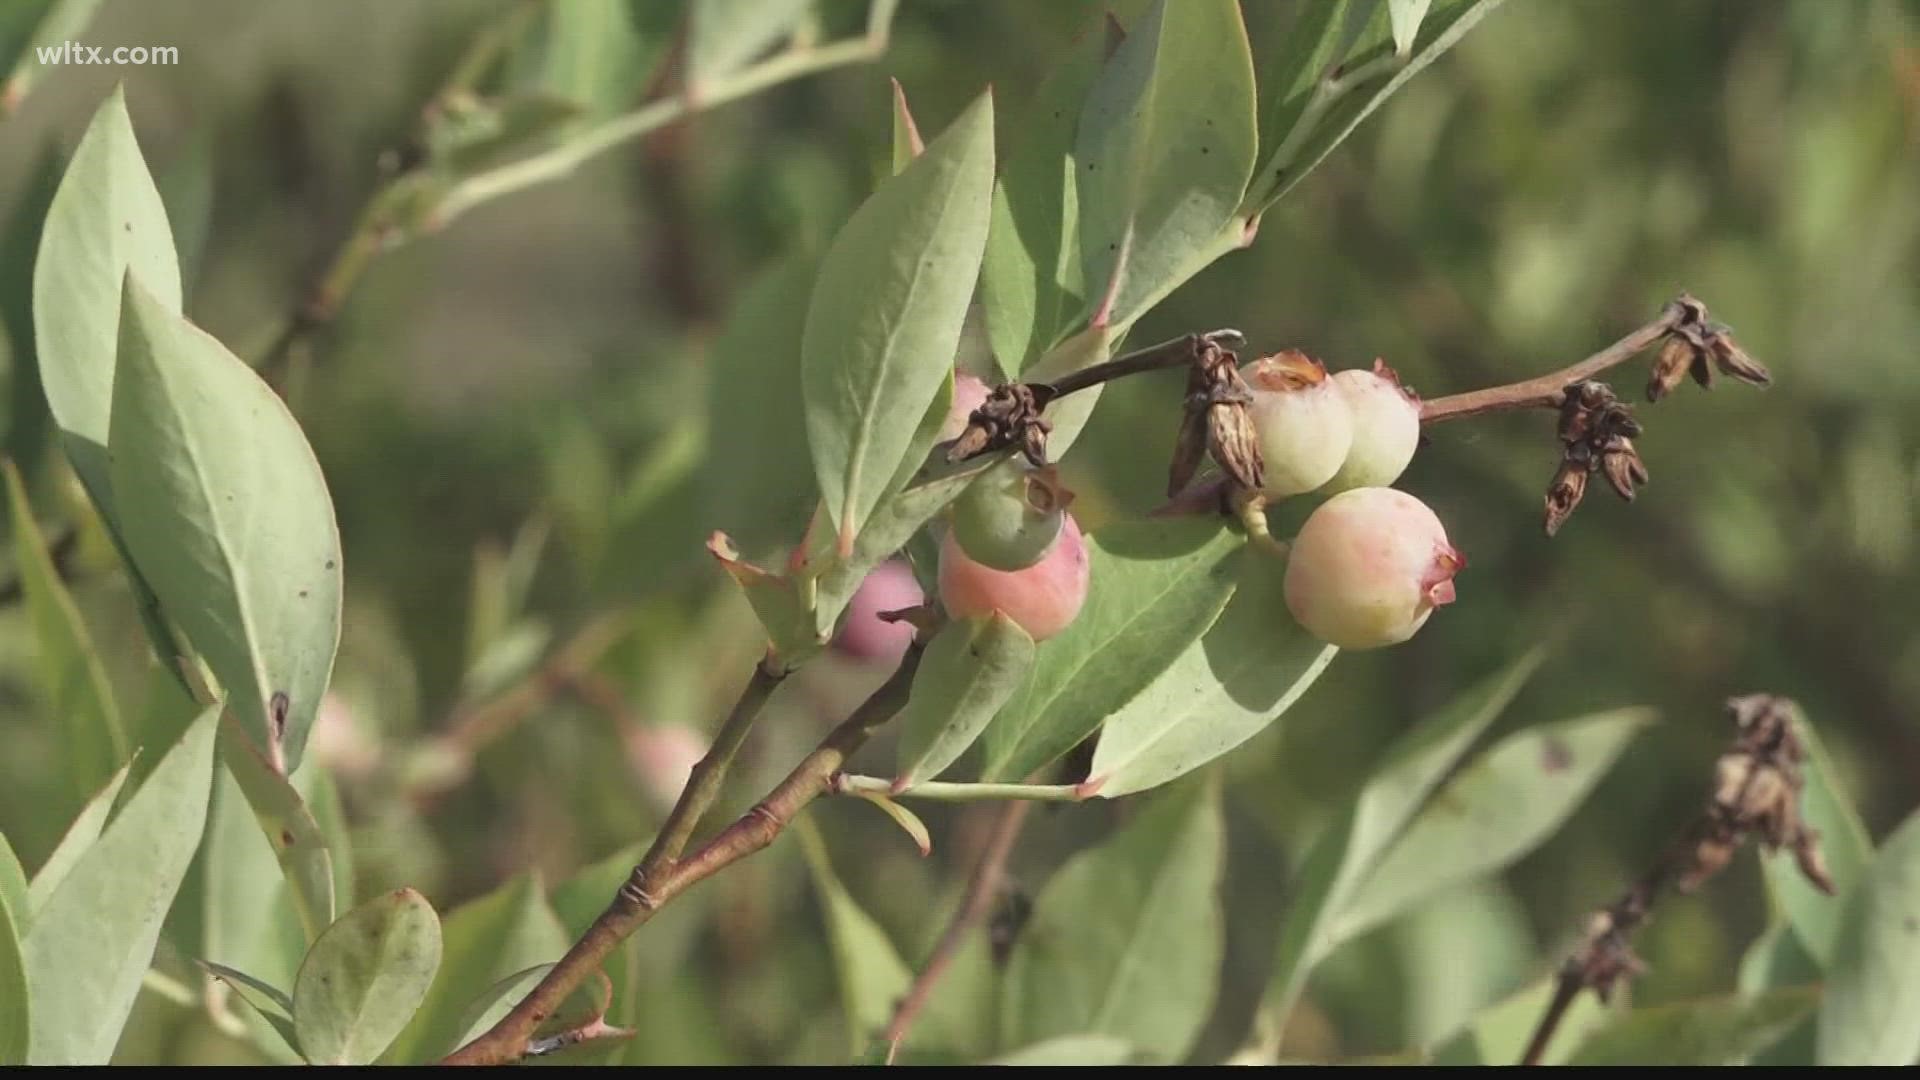 News 19's Peyton Lewis visited a blueberry farm in Swansea to see how they will fare in the upcoming season.